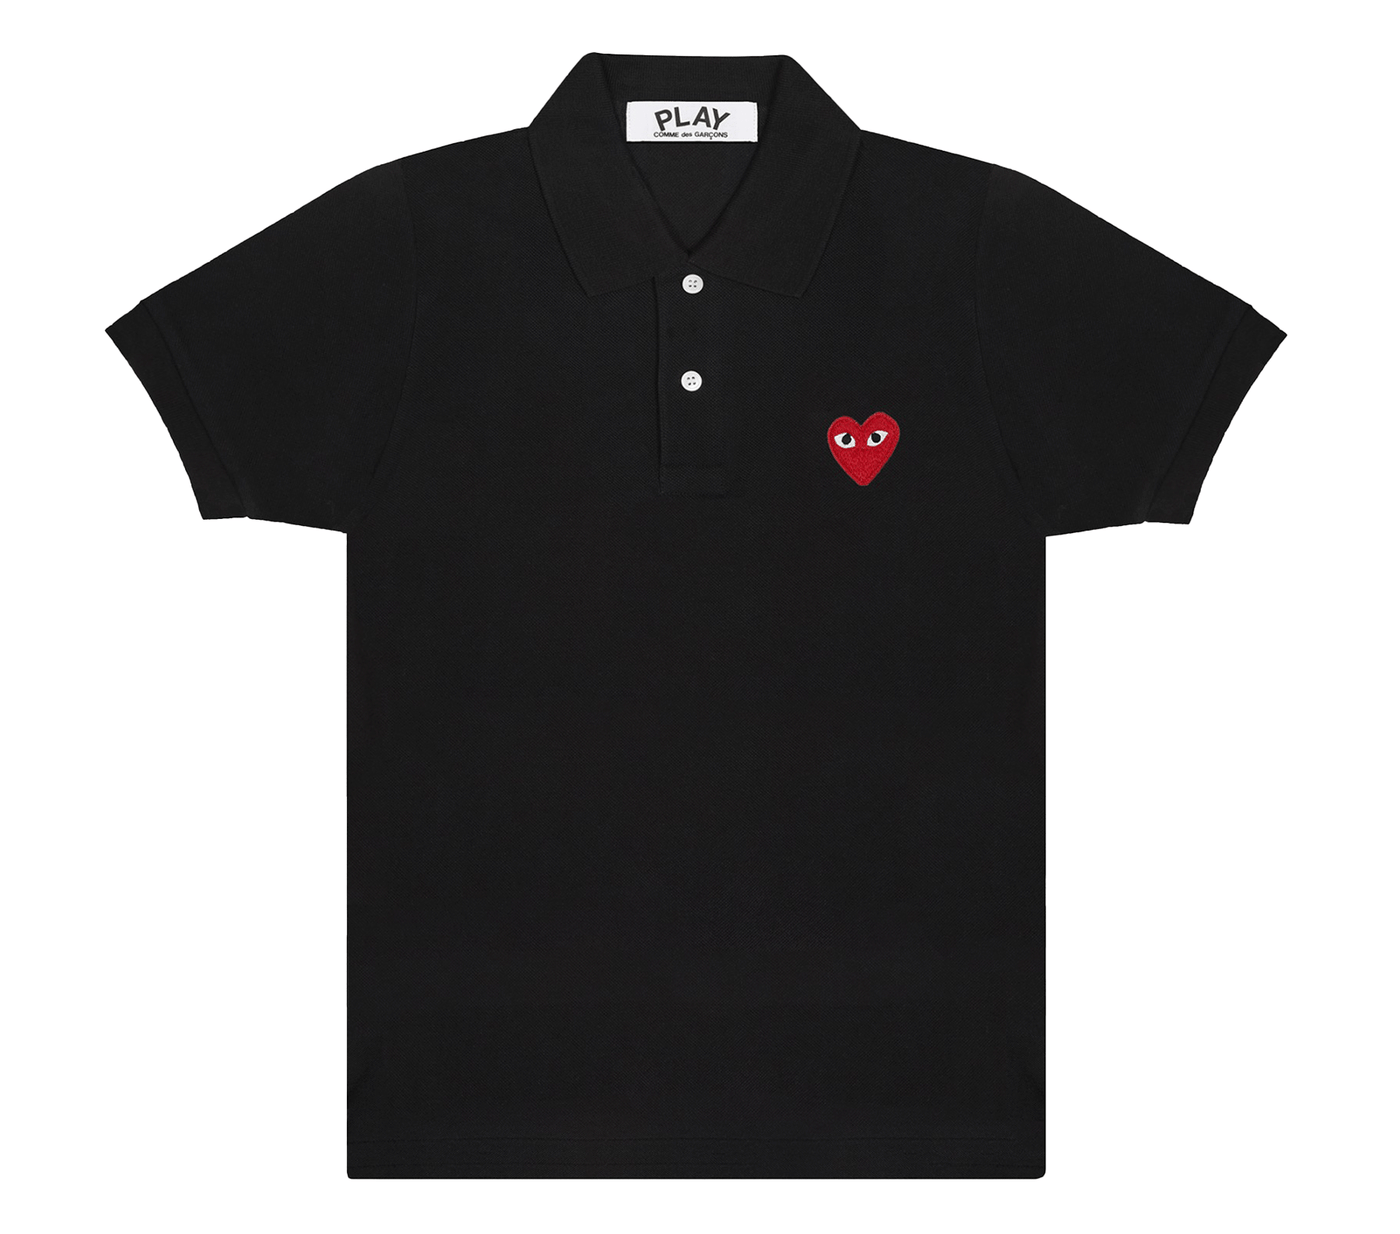     Comme-des-Garcons-Play-Polo-Shirt-with-Red-Emblem-Women-Black-1